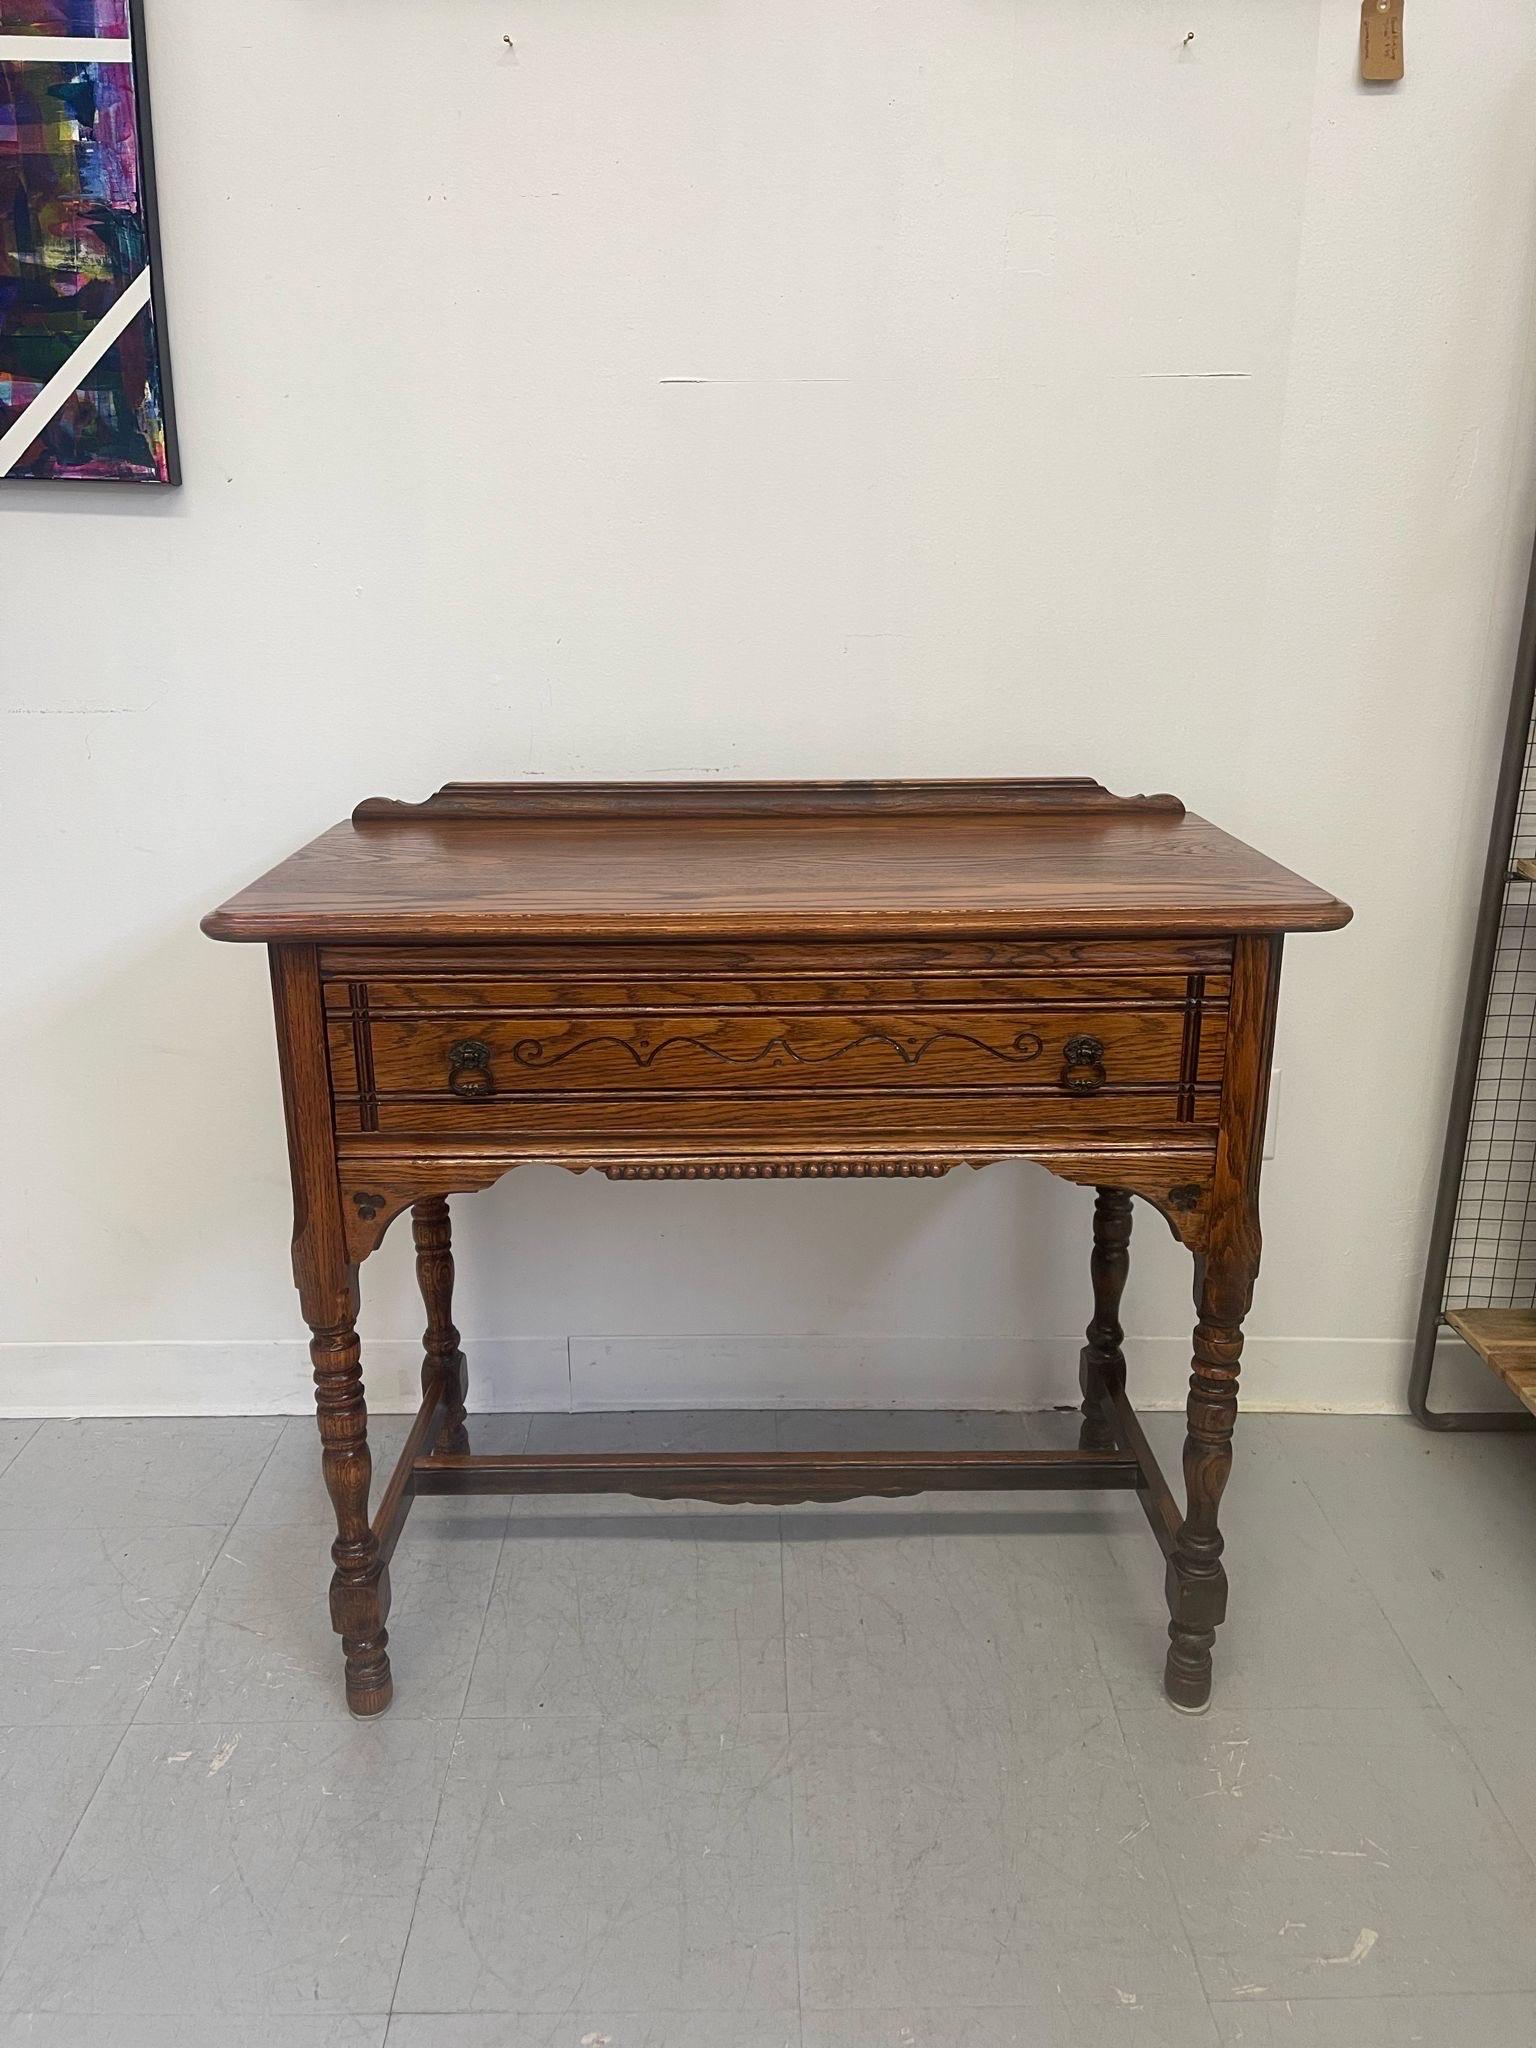 This piece features wood turned legs, original hardware, wood carved detailing, and a dovetailed drawer. The top piece is removable and has matching wood carved details. The detailing on the front of the drawer is unique.Early American Style lines